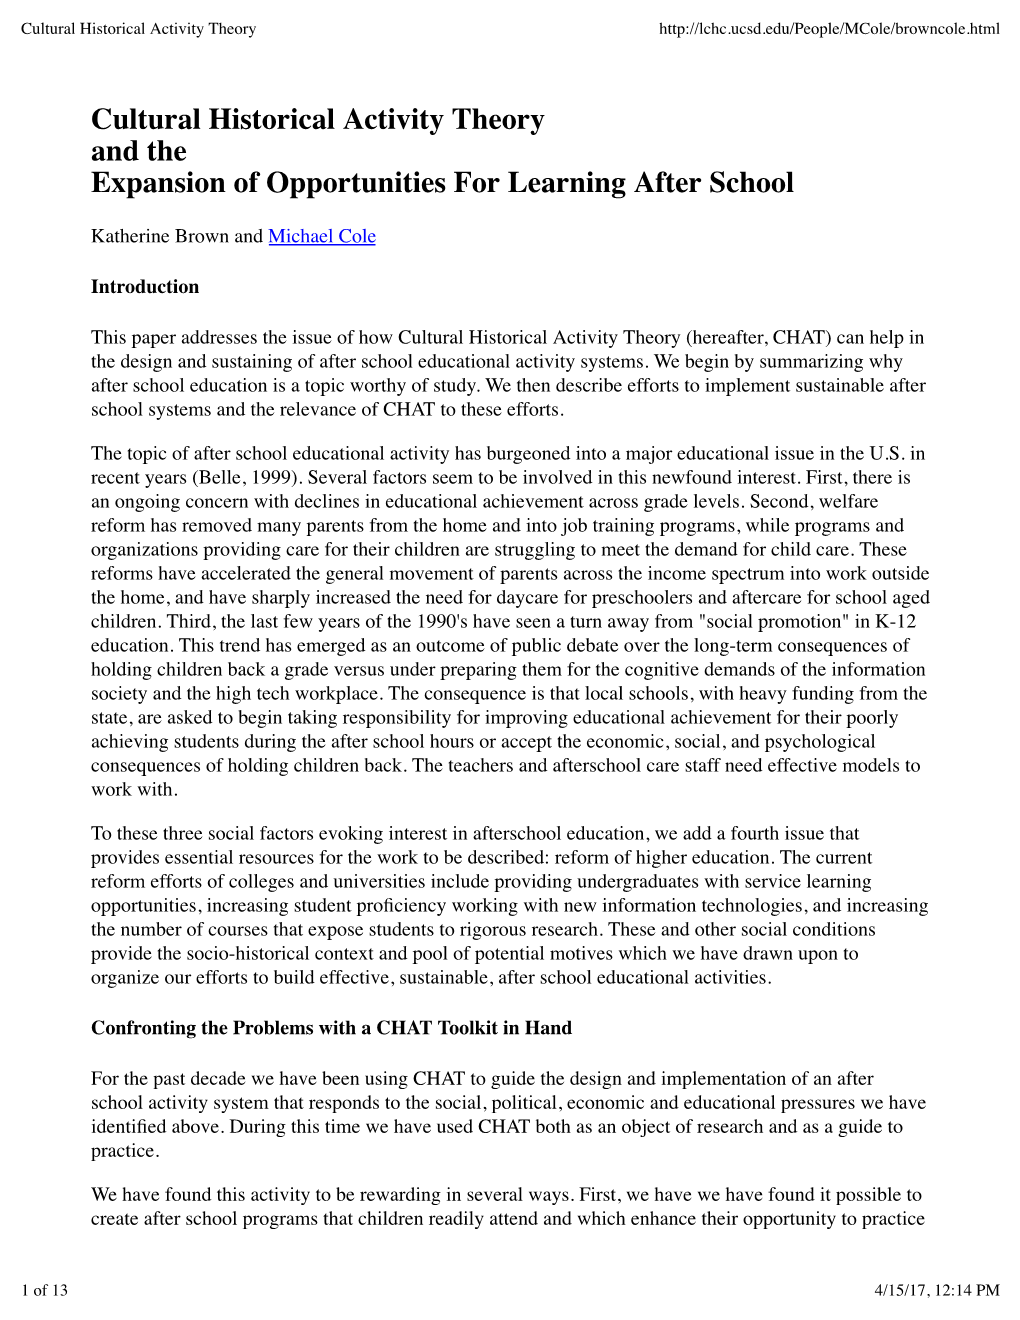 Cultural Historical Activity Theory and the Expansion of Opportunities for Learning After School